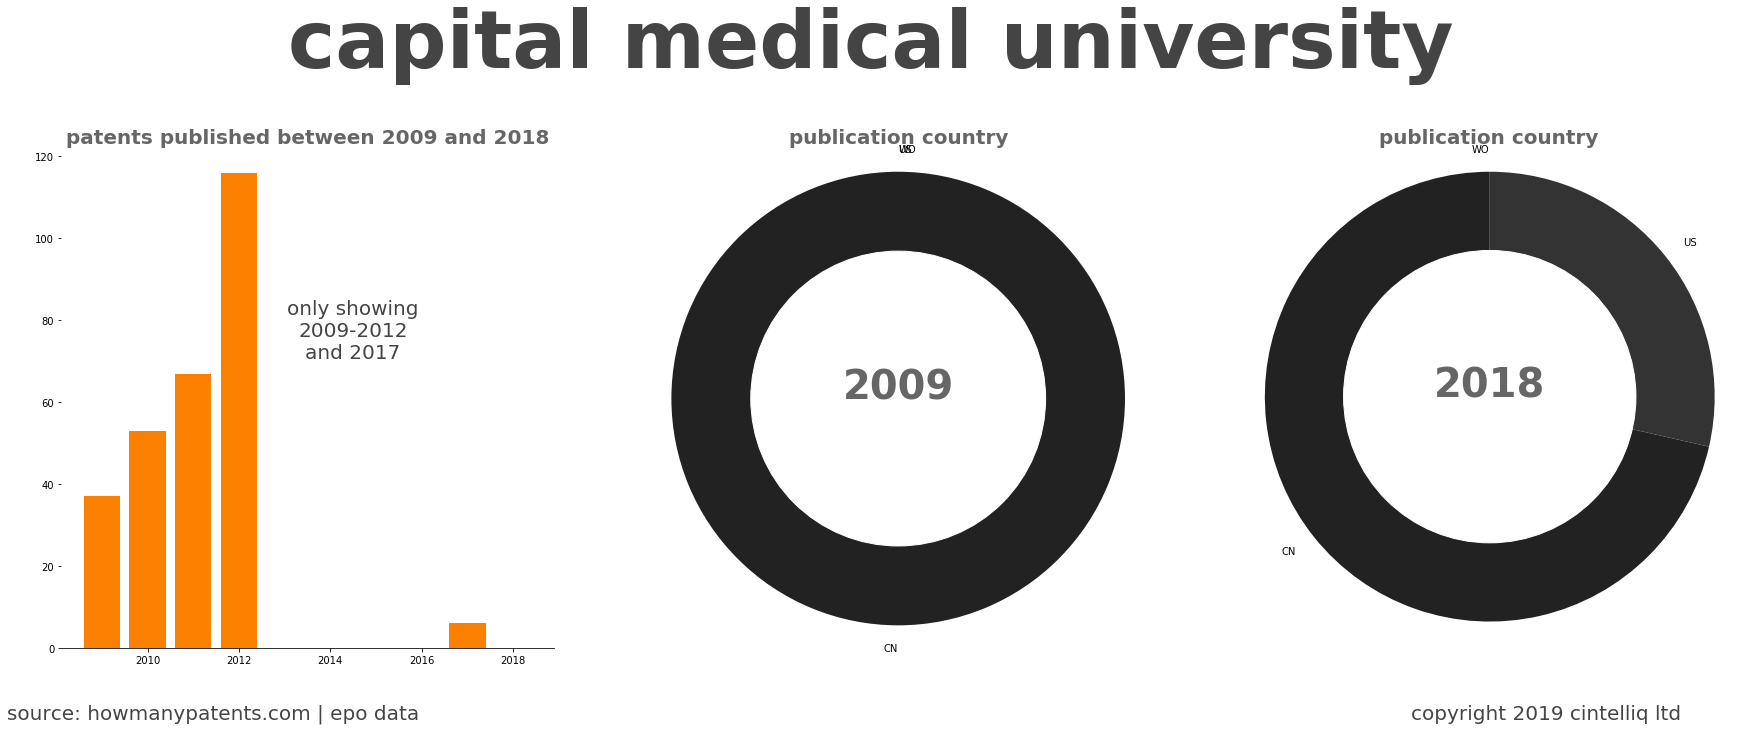 summary of patents for Capital Medical University